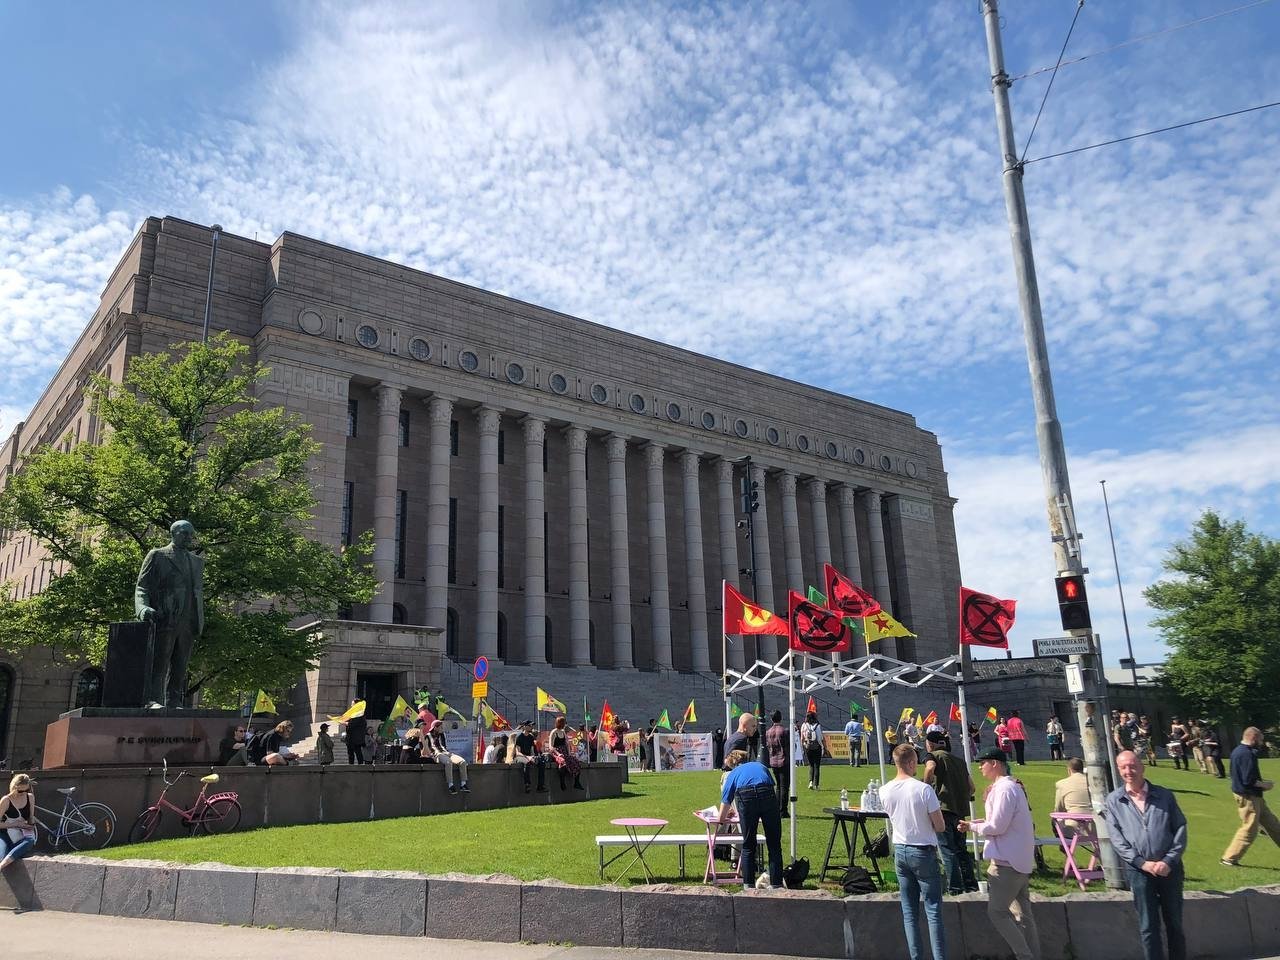 Despite the PKK being a proscribed terrorist group by the EU, terrorist supporters freely hold up PKK and YPG terrorist group symbols together in front of the Finnish parliament building and in Sweden today, further dispelling any arguments that the two are separate, Helsinki, Finland, June 11, 2022. (AA Photo)